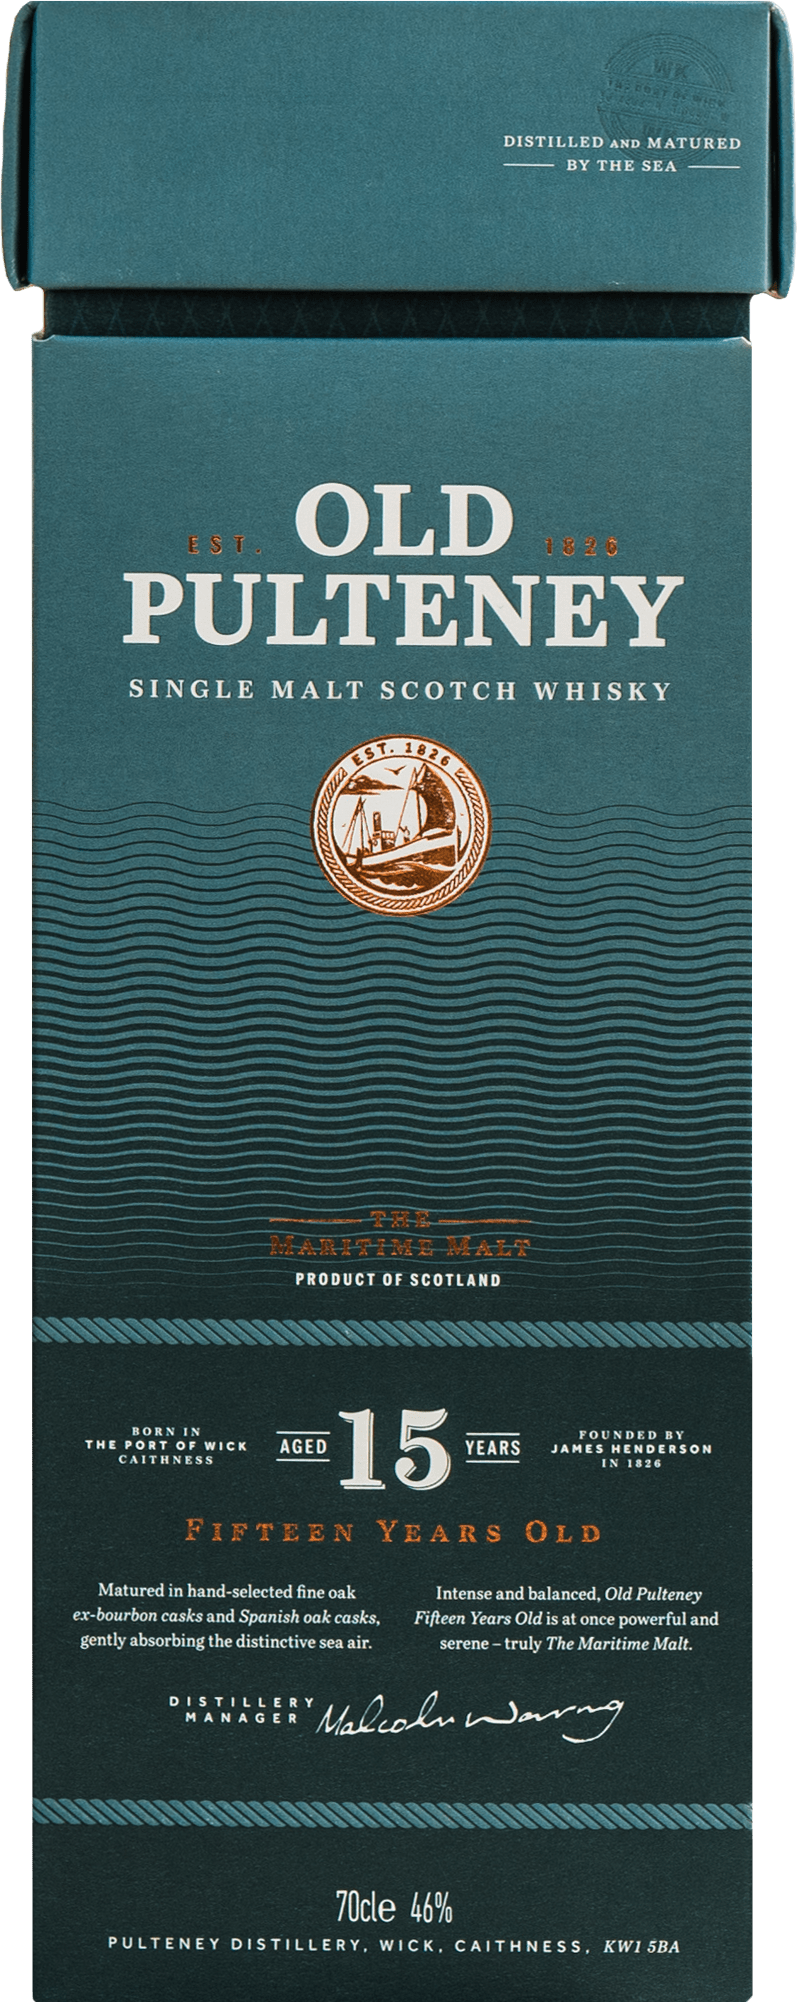 https://oldpulteney.com/wp-content/uploads/2022/08/Old-Pulteney-15-min-2.png